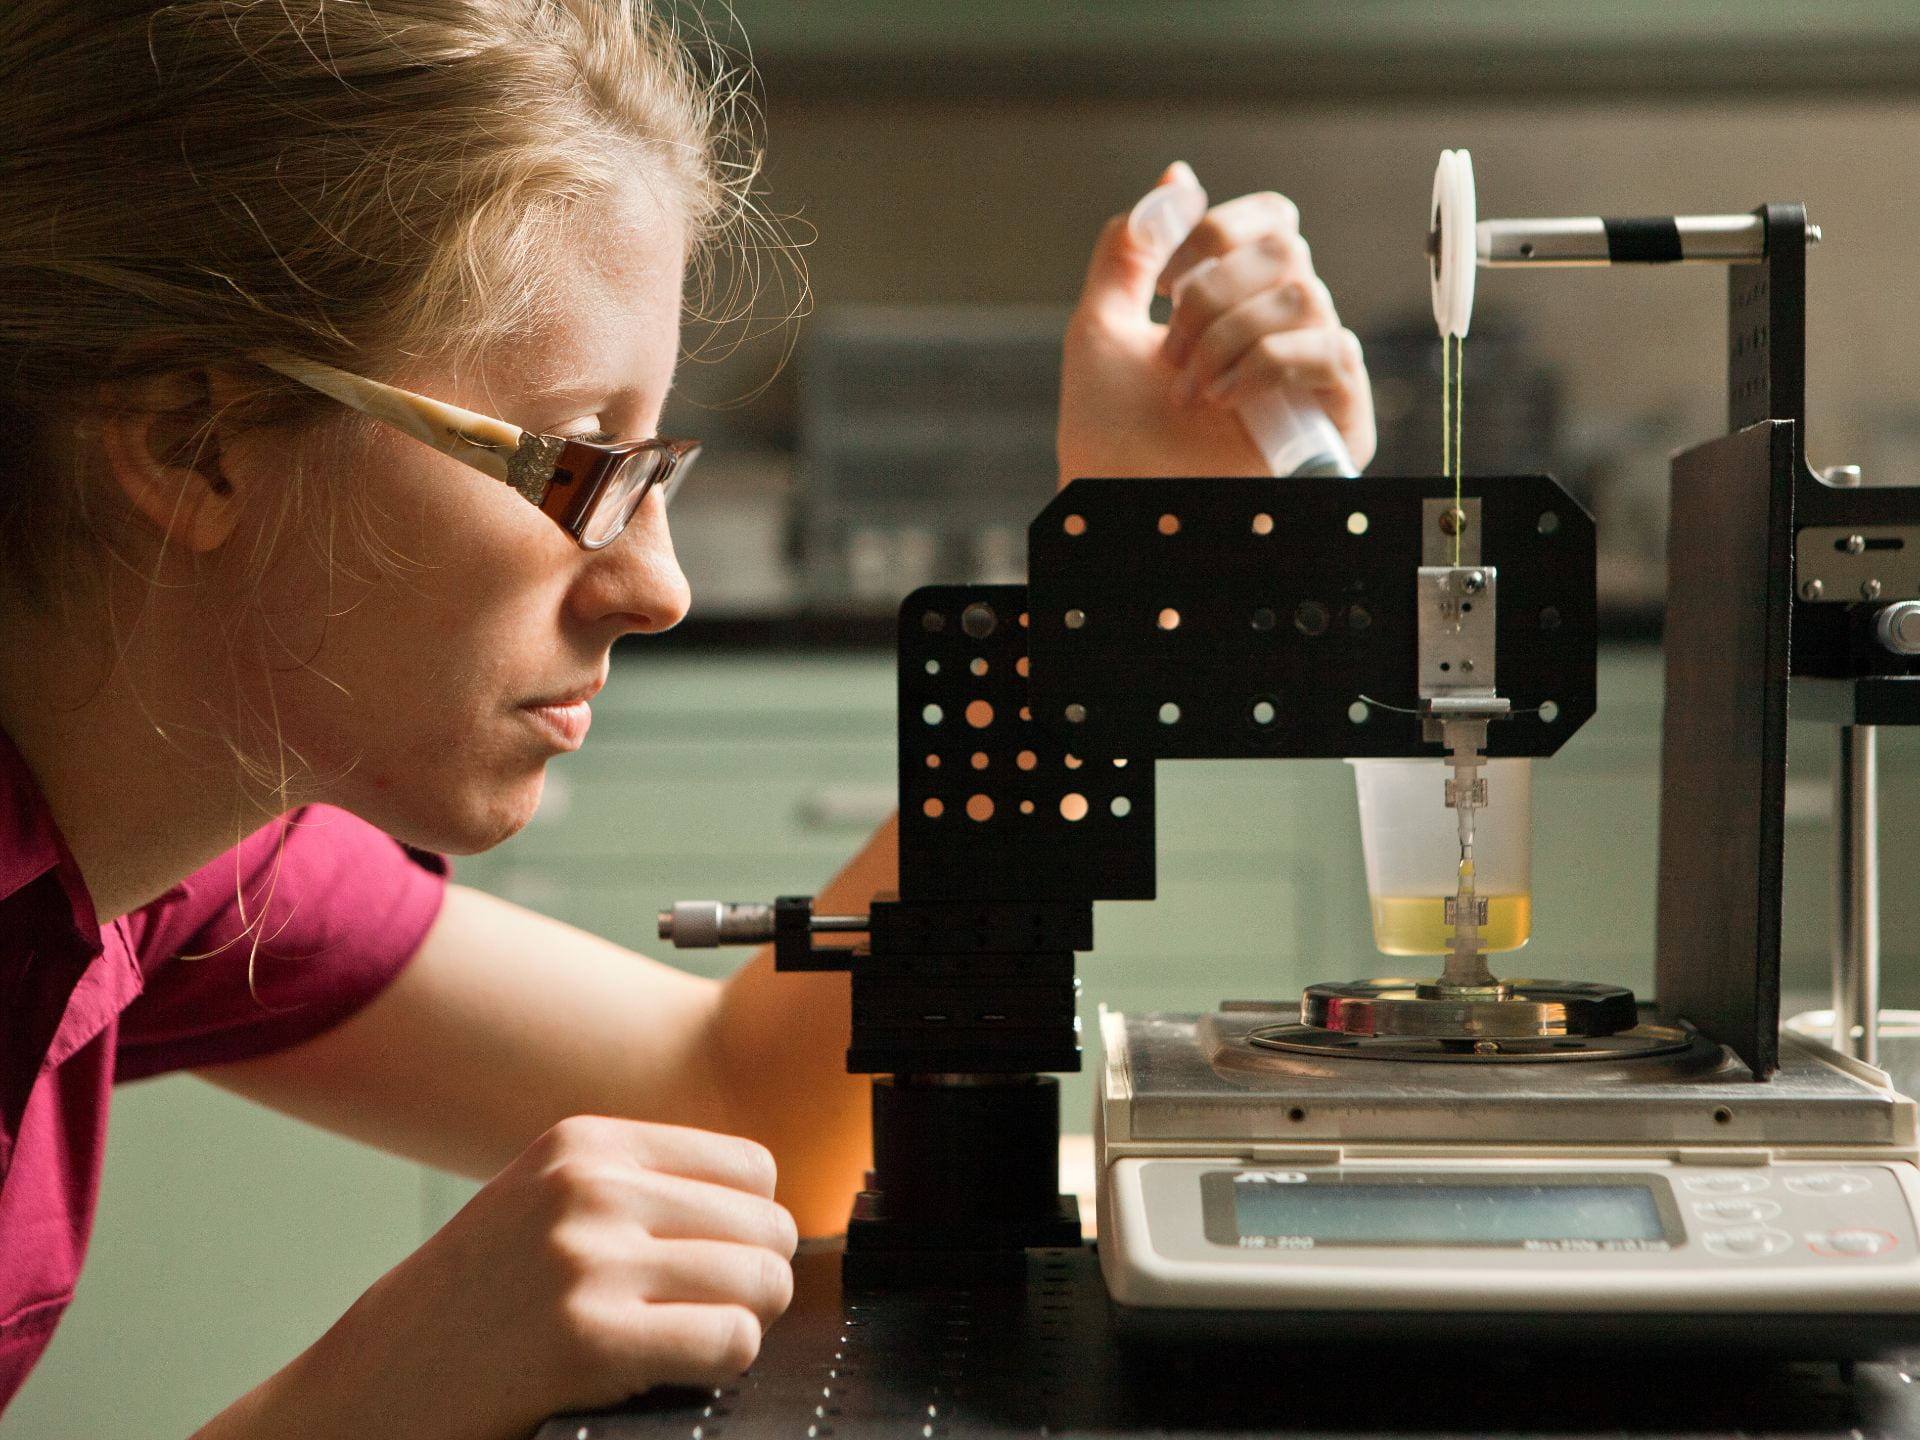 Photograph of a chemical engineering student in the lab